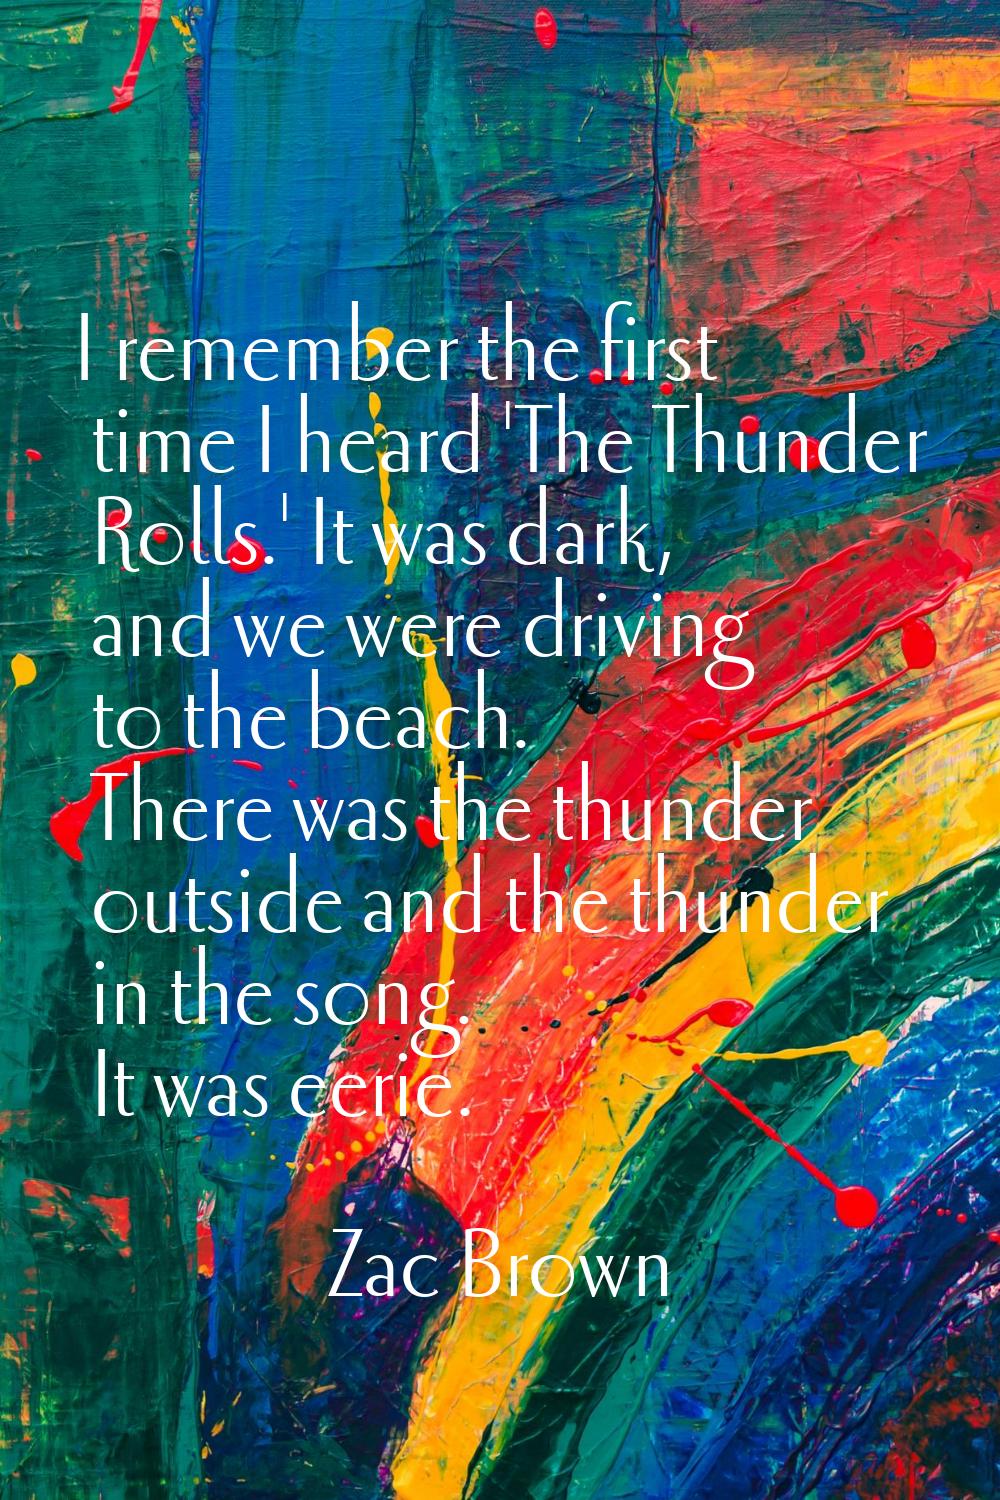 I remember the first time I heard 'The Thunder Rolls.' It was dark, and we were driving to the beac